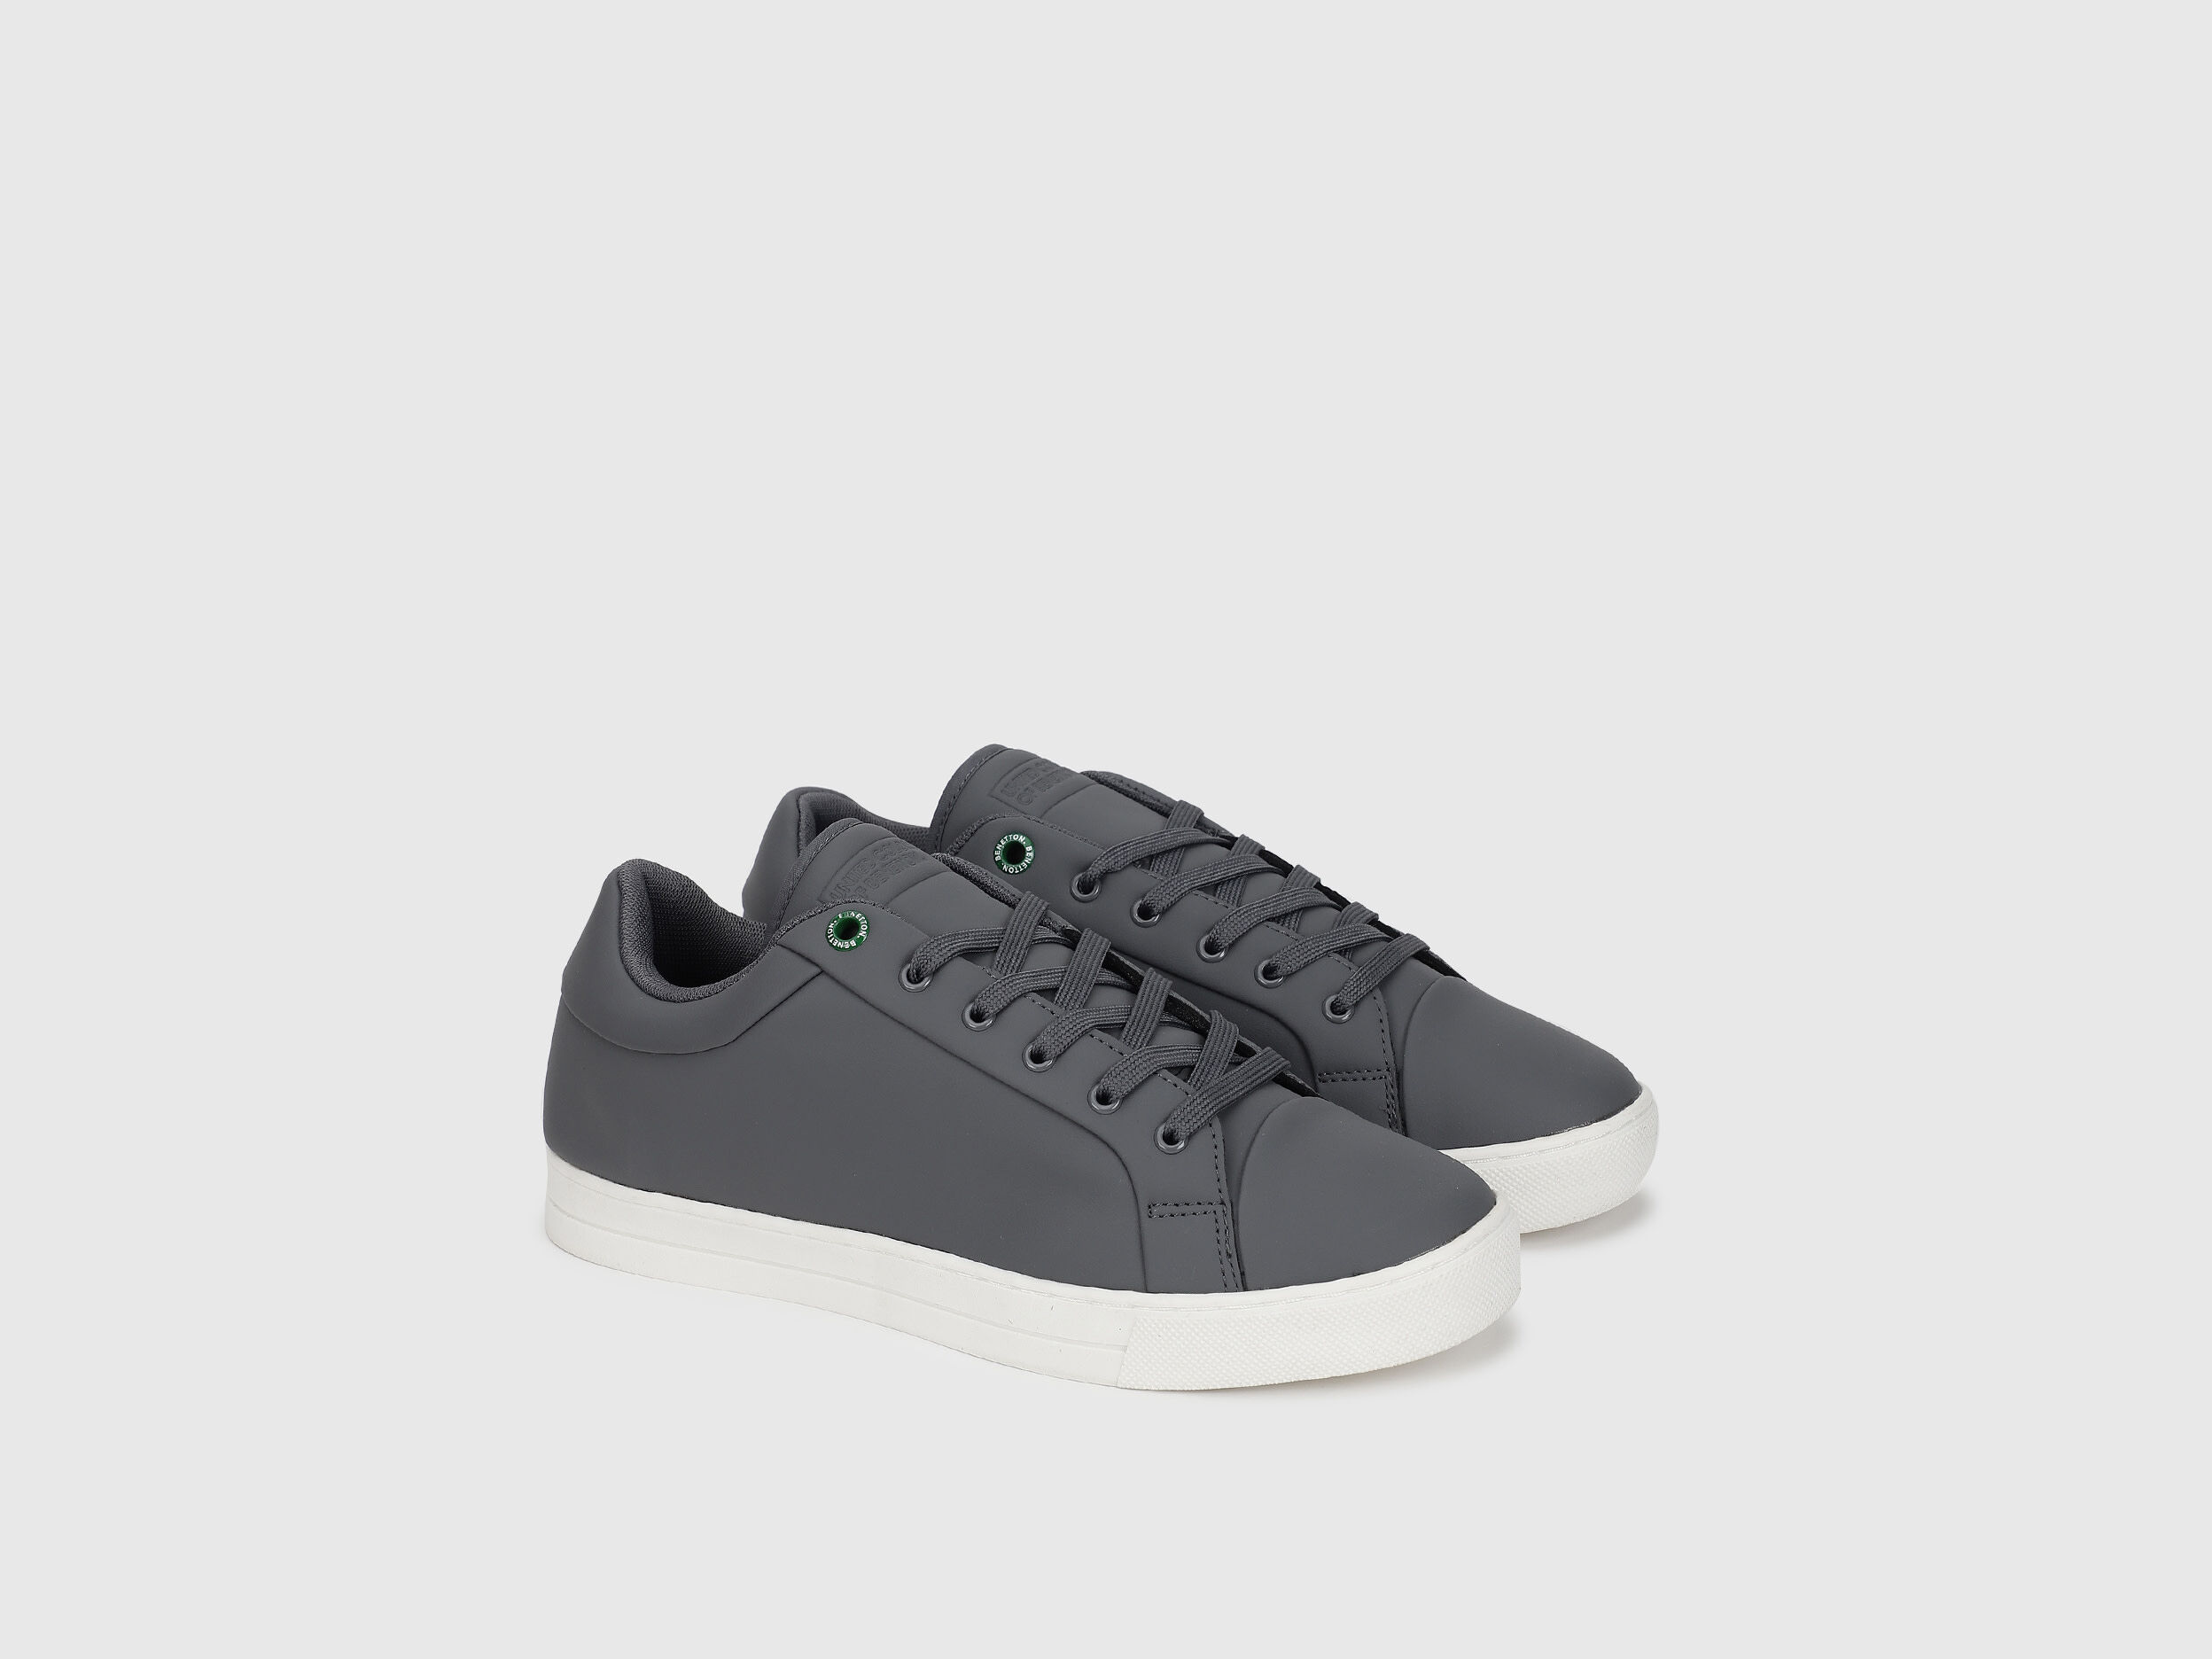 Men's Shoes and Accessories Collection 2021 | Benetton